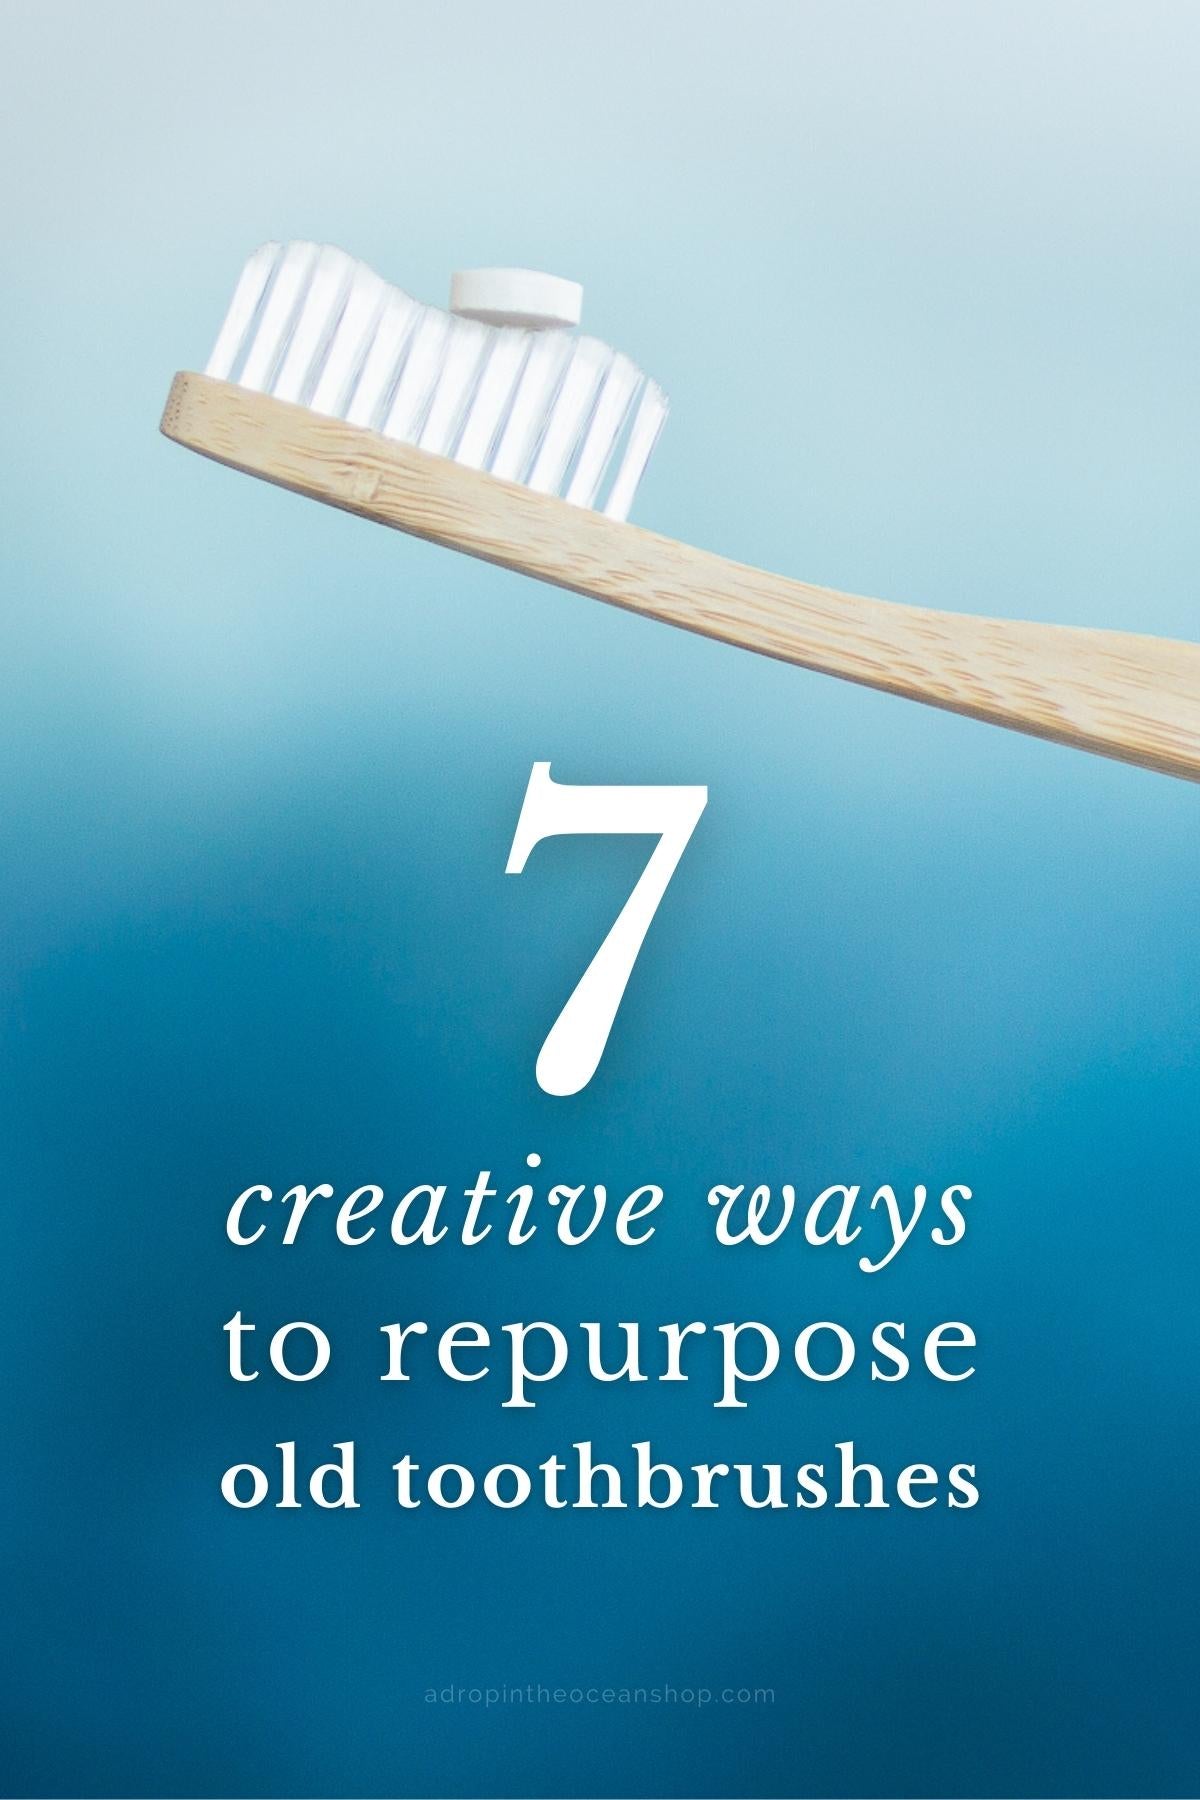 7 Creative Ways to Reuse Old Toothbrushes